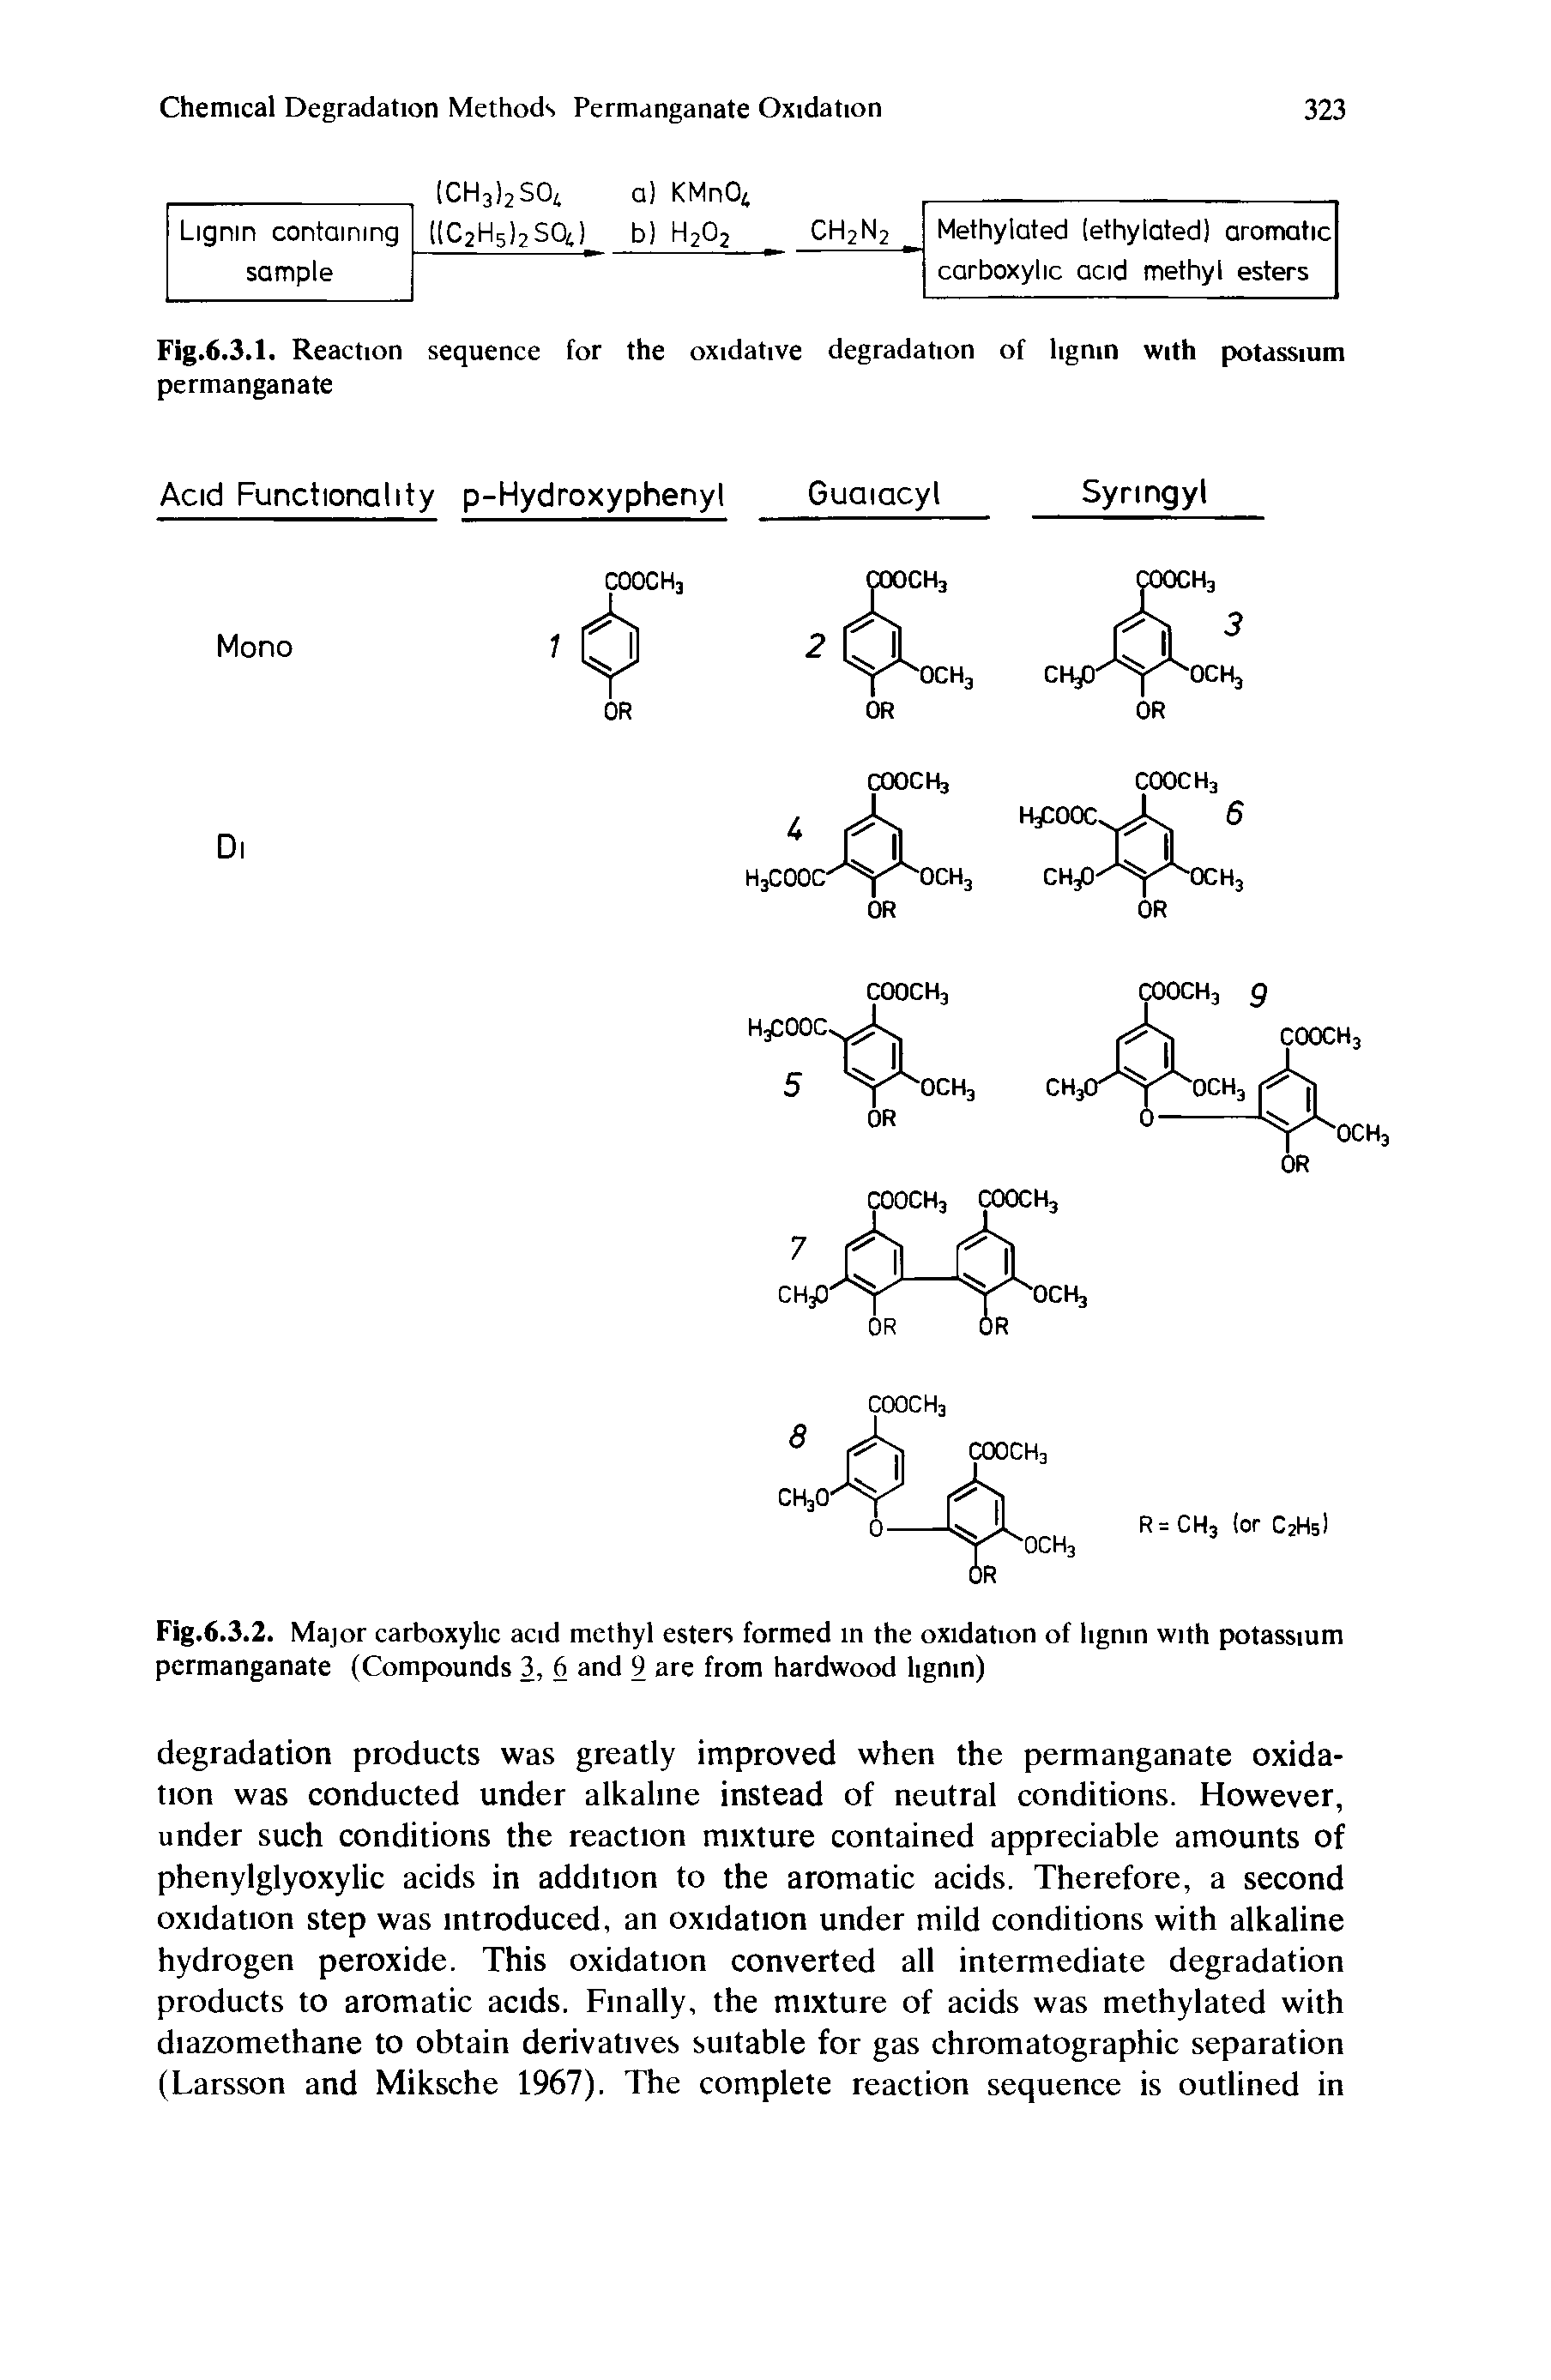 Fig.6.3.2. Major carboxylic acid methyl esters formed in the oxidation of lignin with potassium permanganate (Compounds 3, 6 and 9 are from hardwood lignin)...